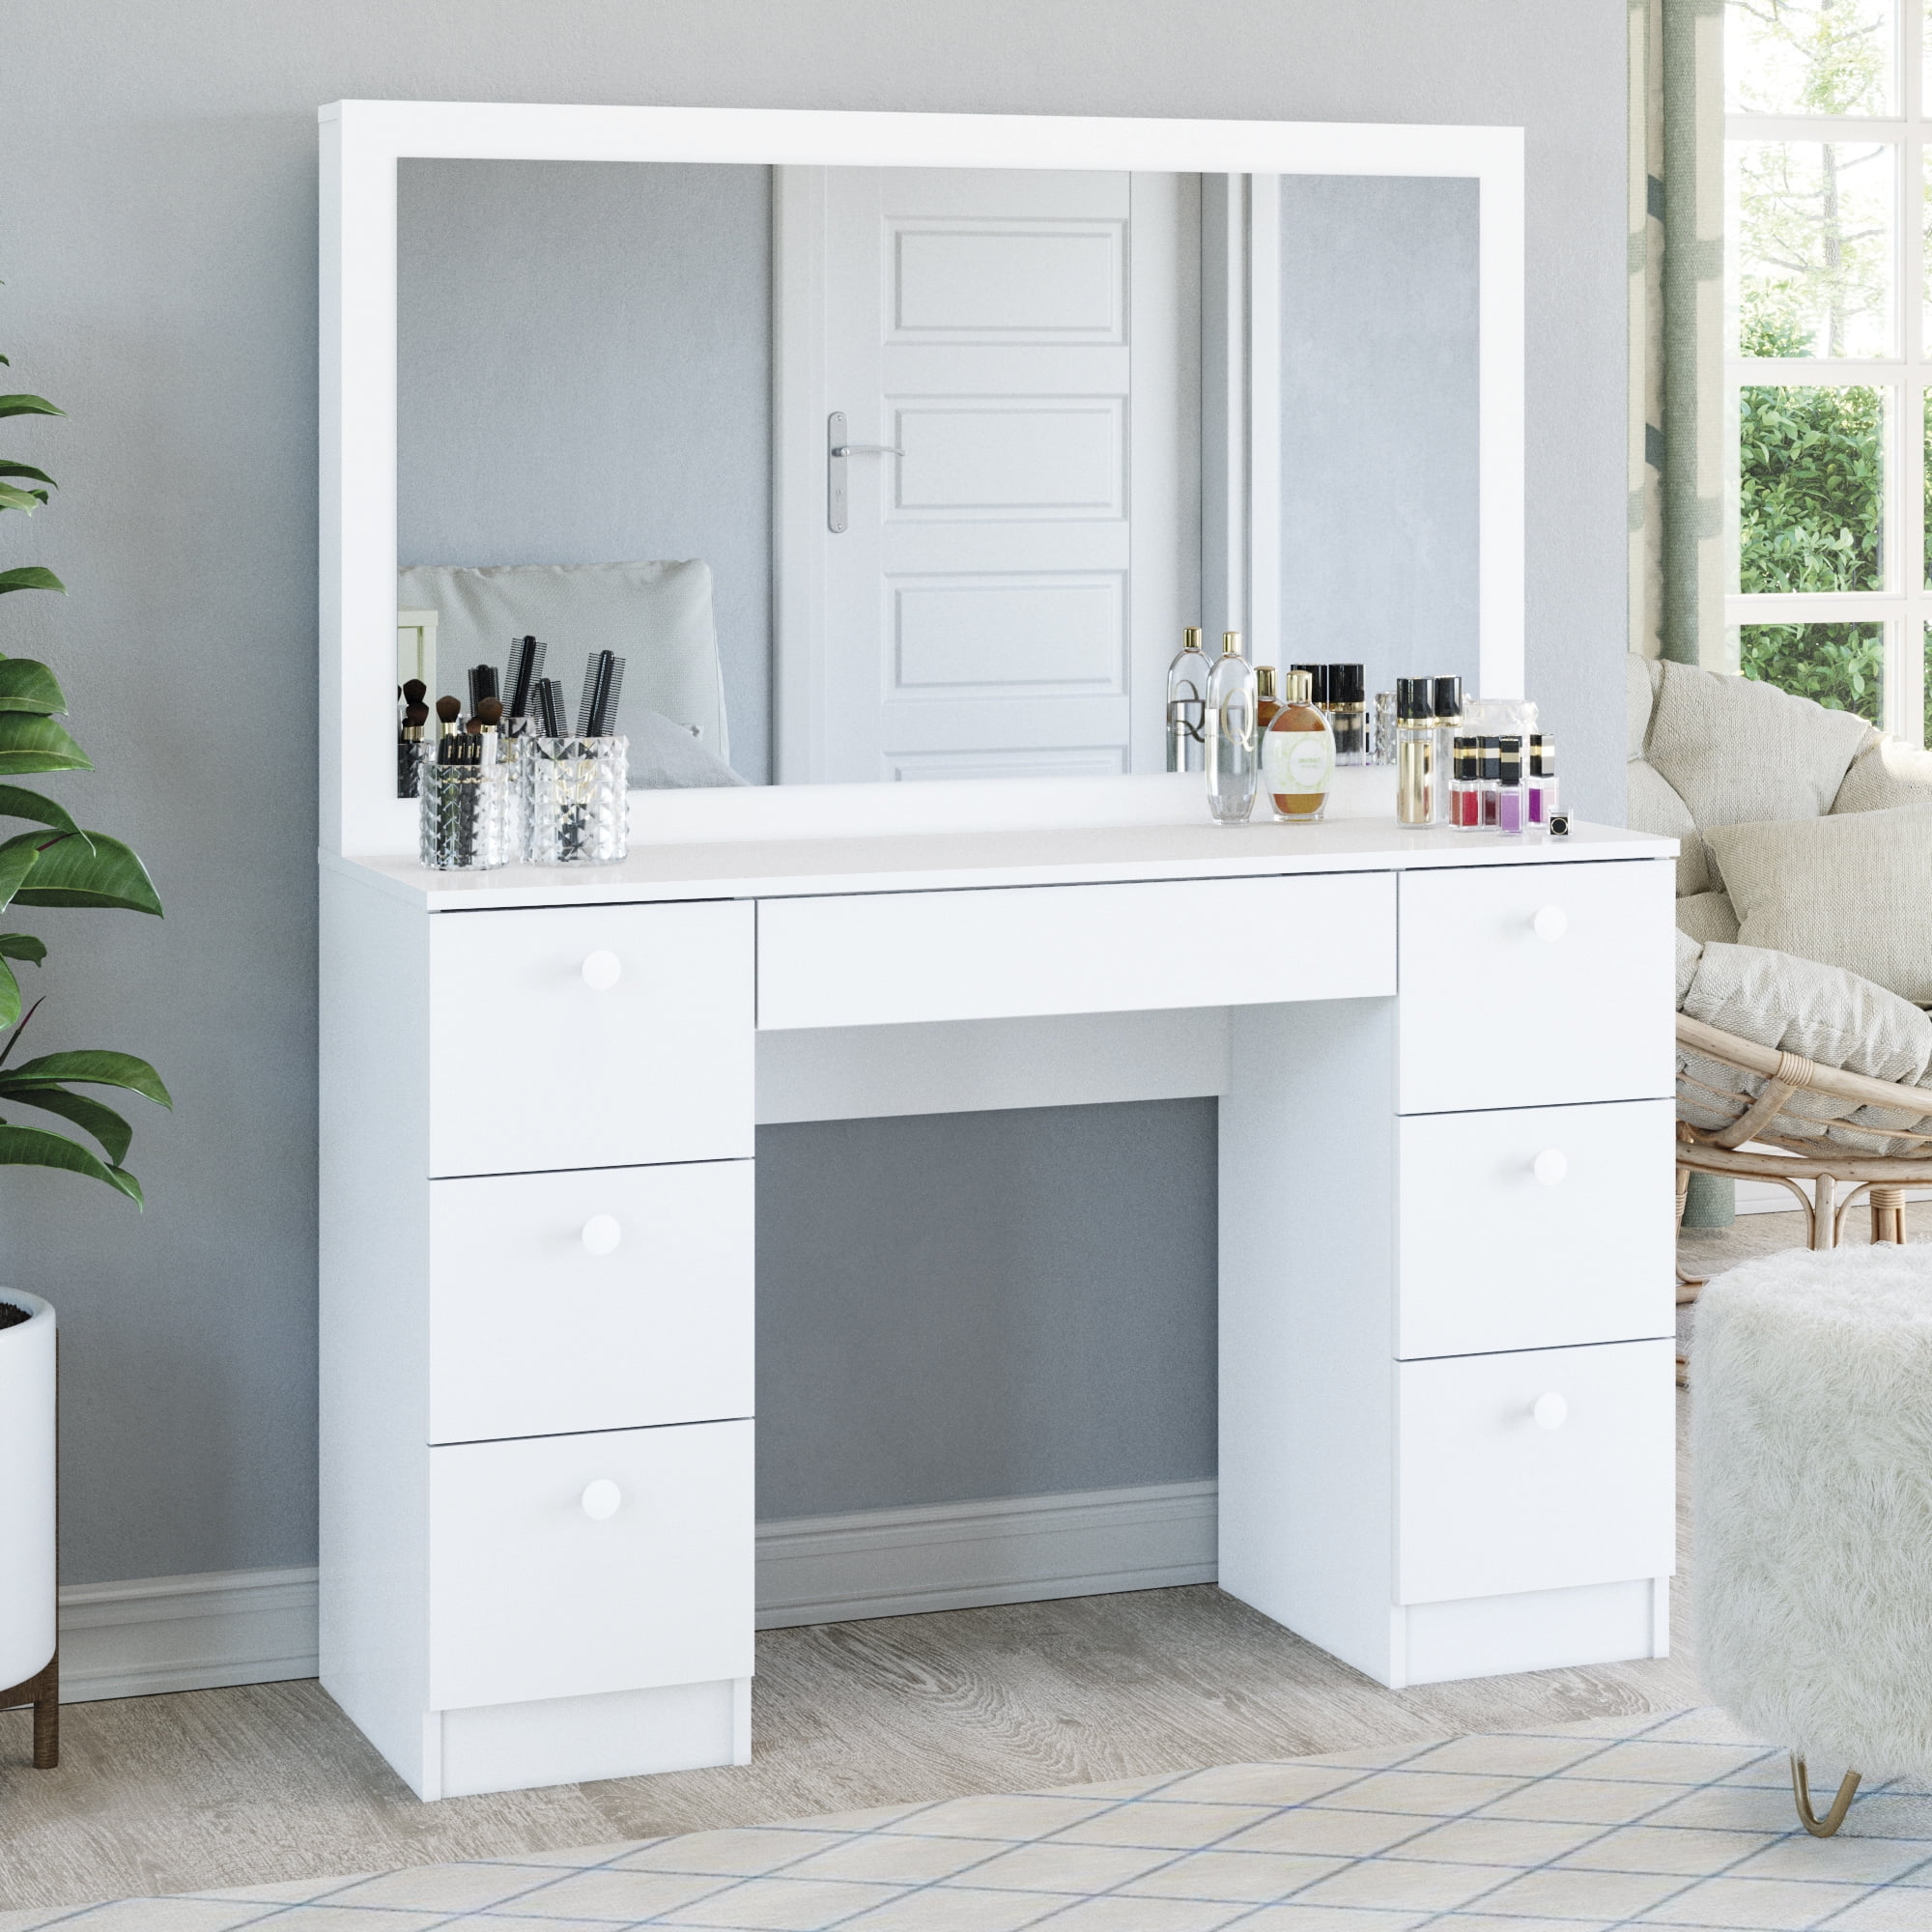 Boahaus Artemisia Modern Vanity Table with Mirror, White Finish, for Bedroom